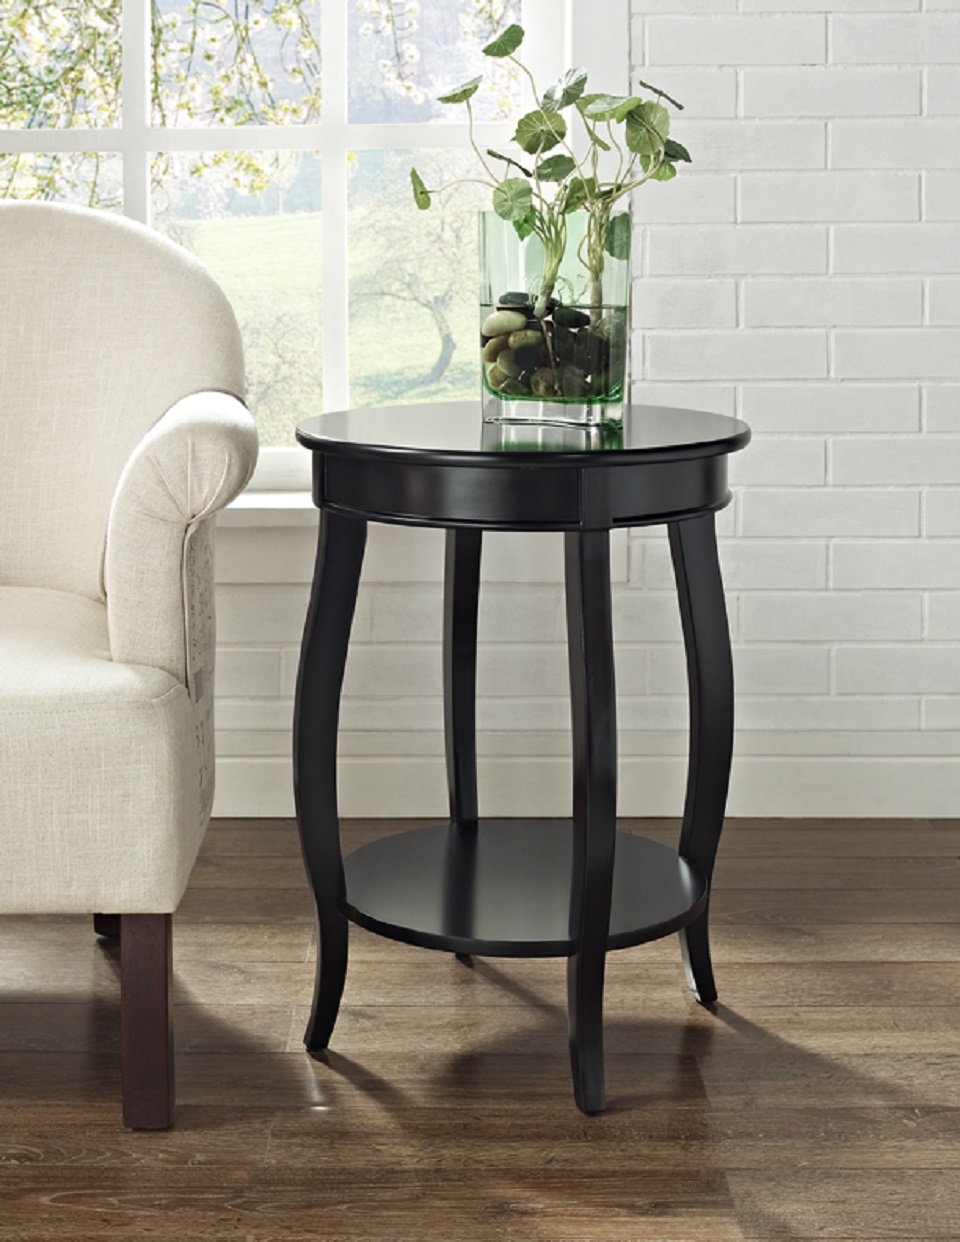 L Powell Black Round Table with shelf